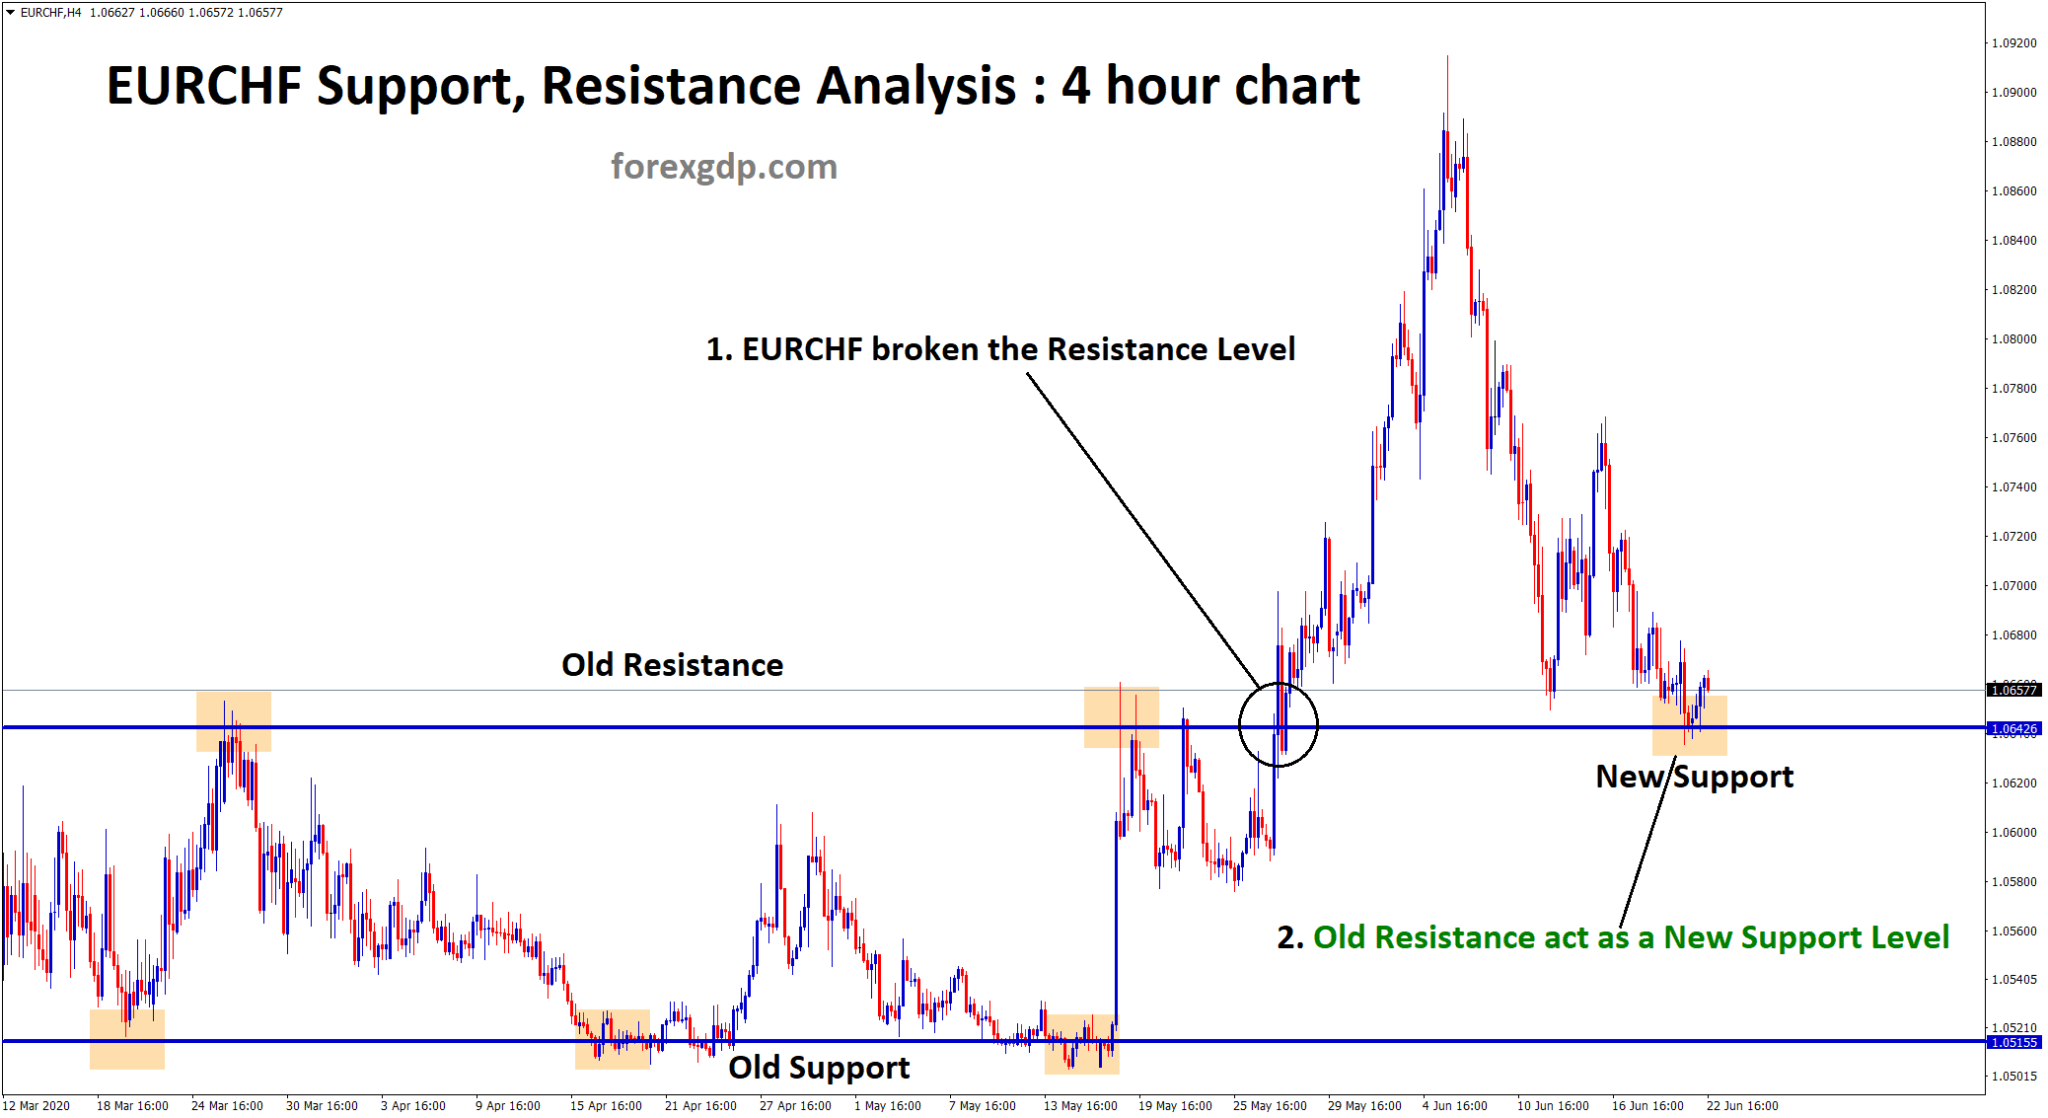 eurchf old resistance act as a new support level